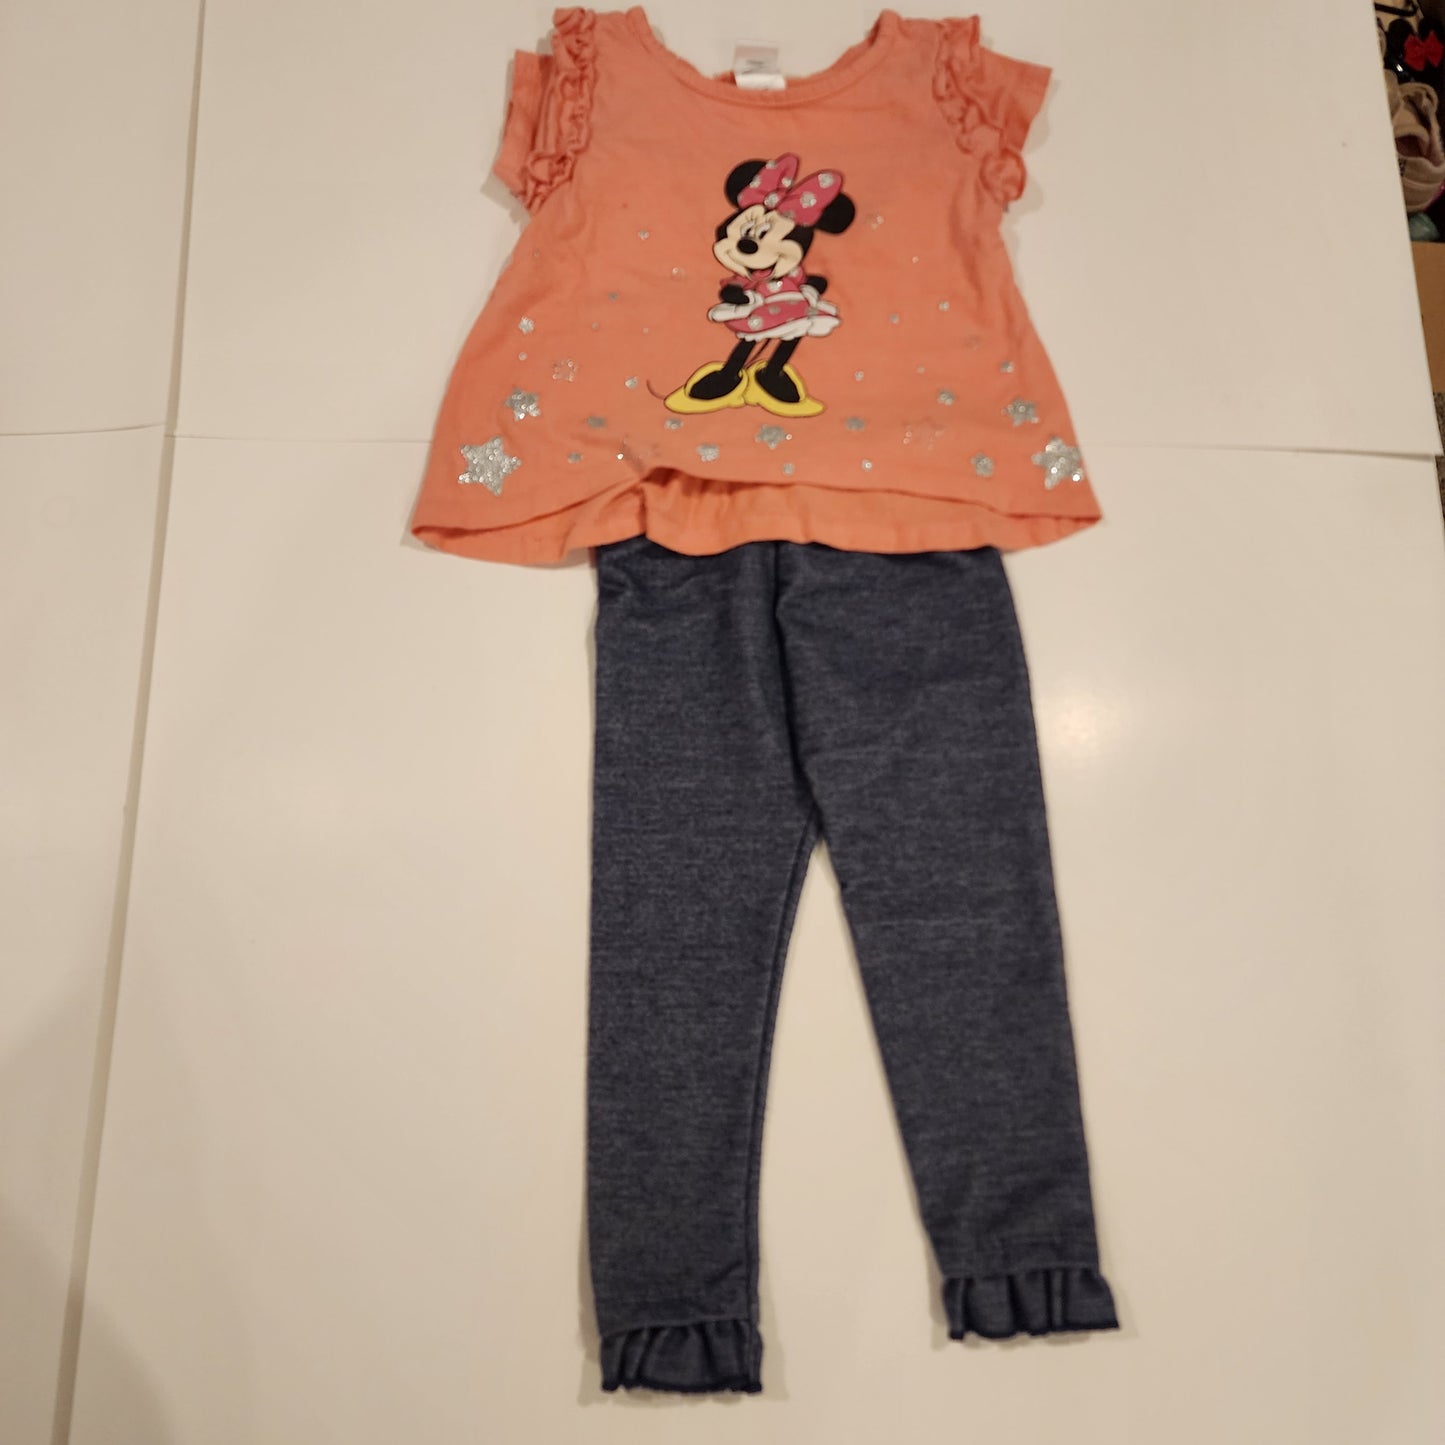 Girls 18 mo Minnie Mouse outfit